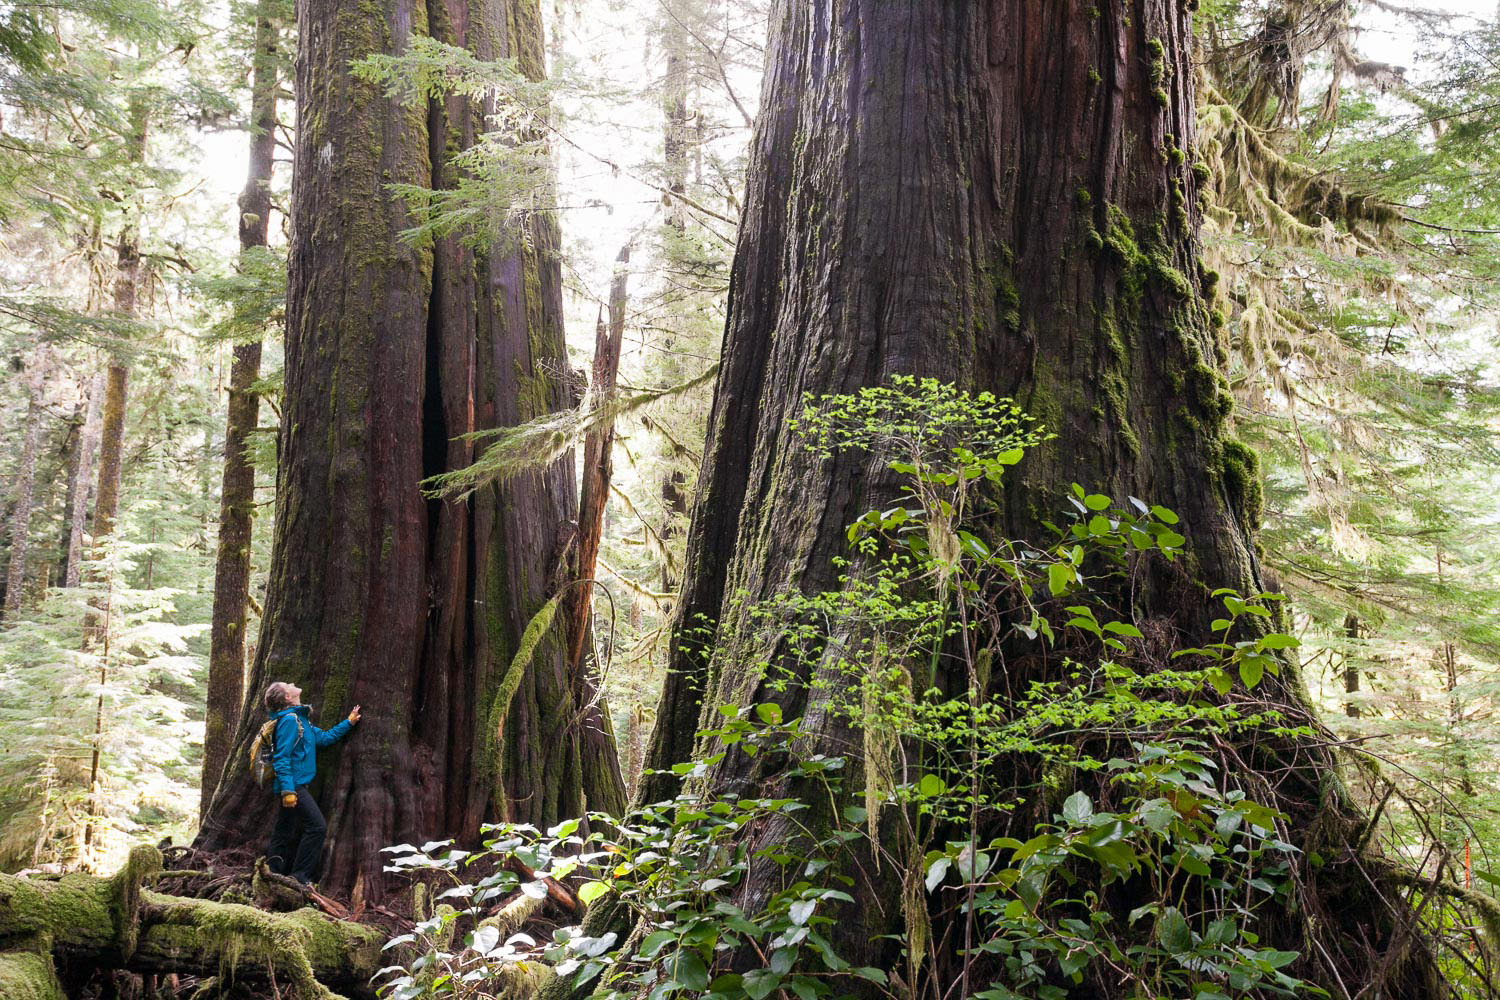 ACTION ALERT: Have your say on the BC government’s Old Growth Strategy